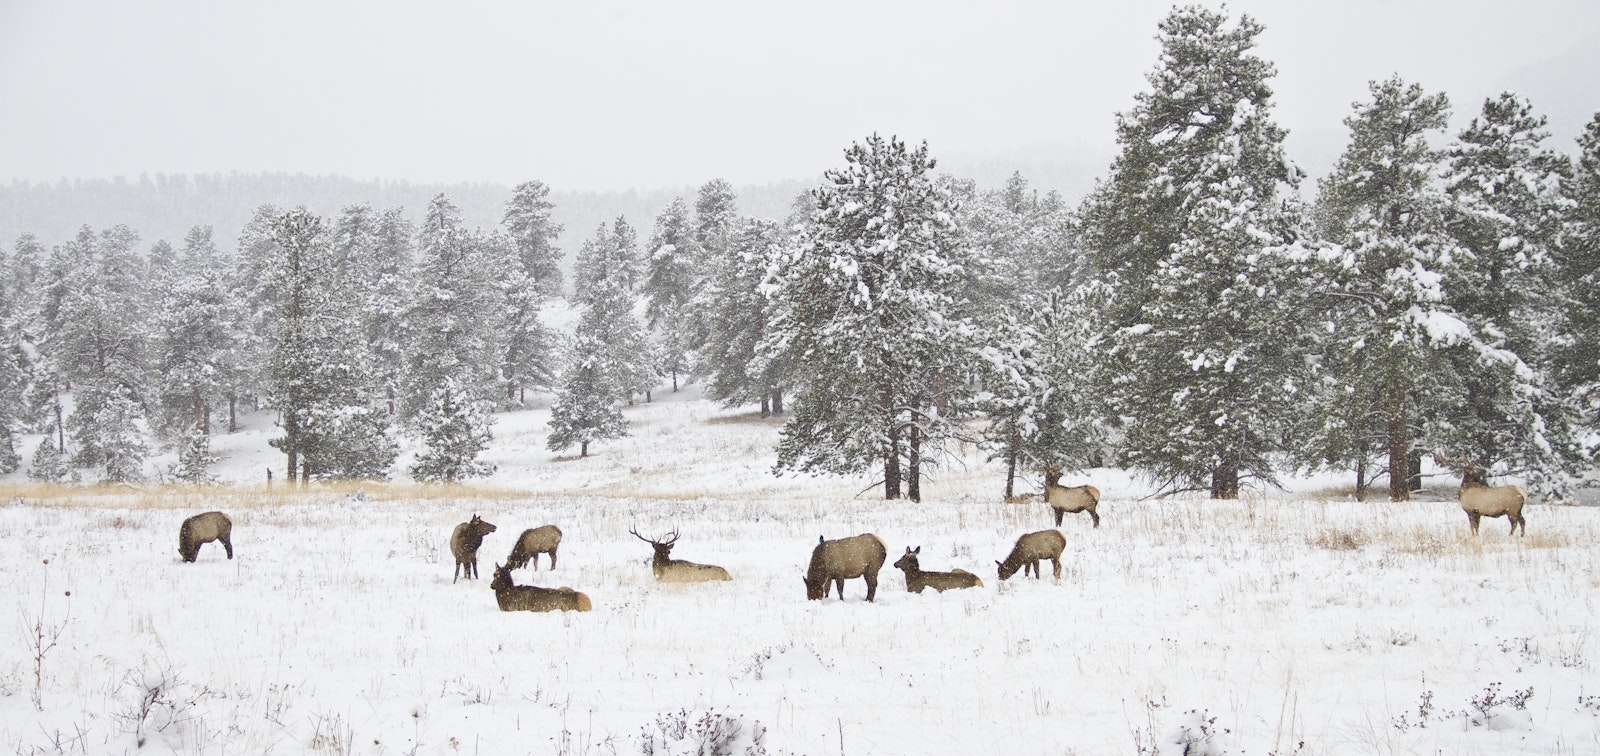 A snowy landscape with deer lounging in a field